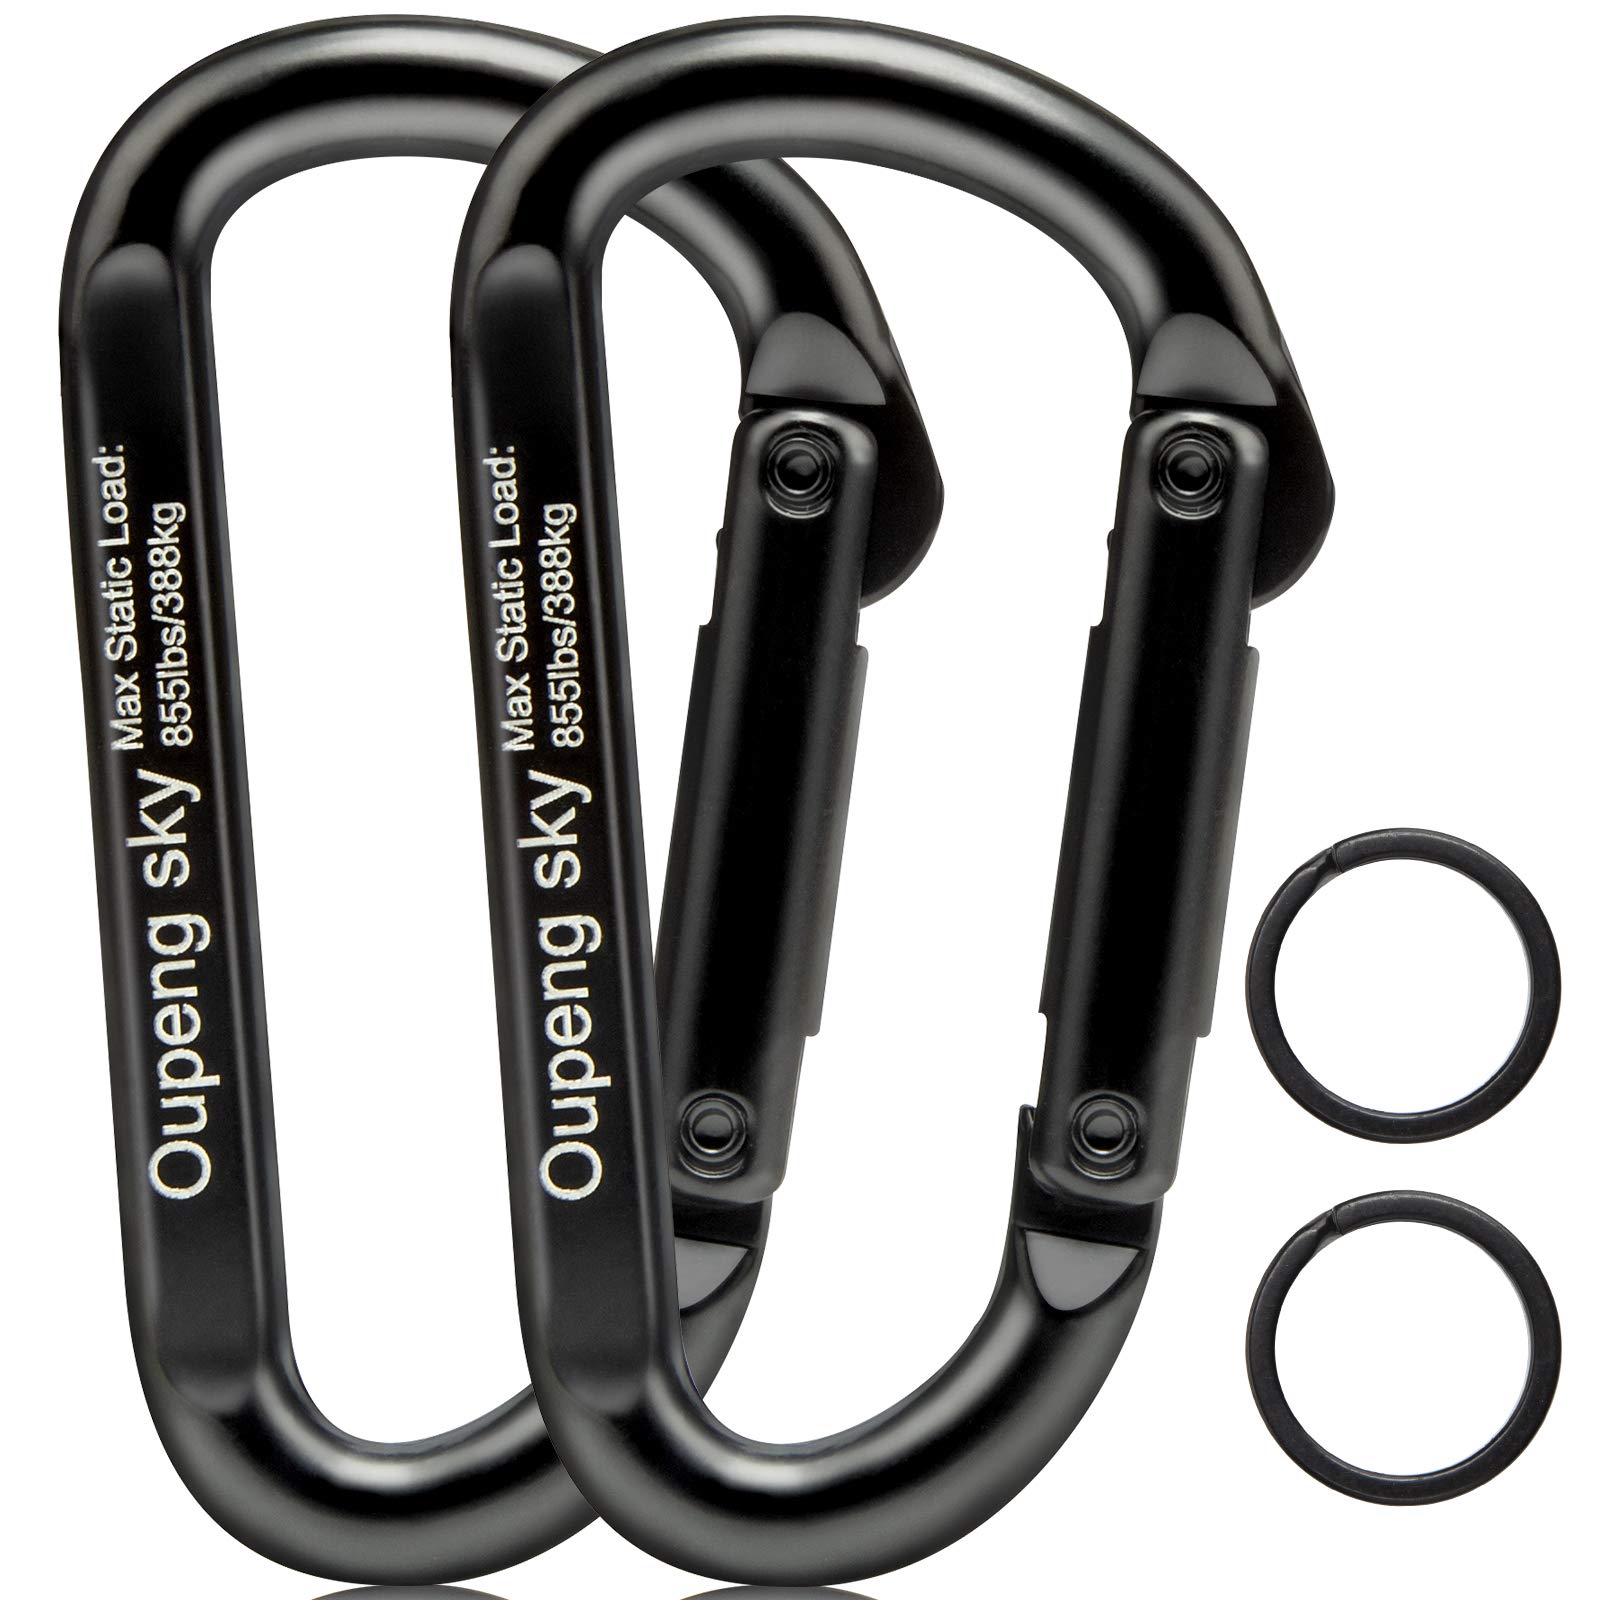 100PCS 2inch Spring Snap Hooks Carabiner, 3/16 Small Carabiner Clip, Heavy  Duty Quick Link for Camping, Fishing, Hiking, Dog Leash, Traveling, Gym